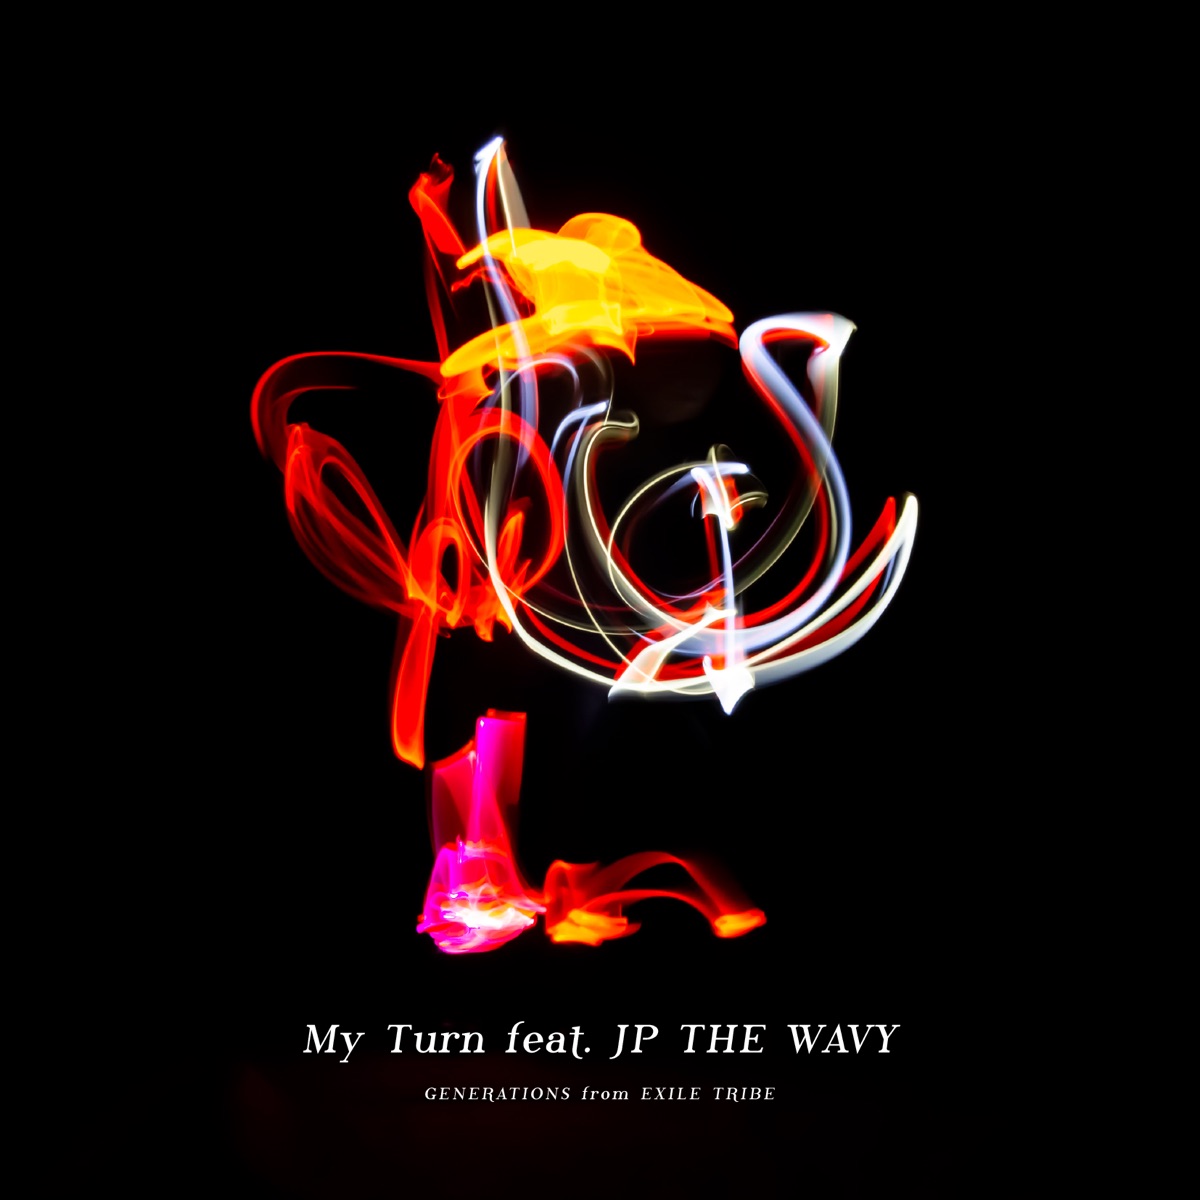 『GENERATIONS from EXILE TRIBE - My Turn feat JP THE WAVY』収録の『My Turn feat. JP THE WAVY』ジャケット